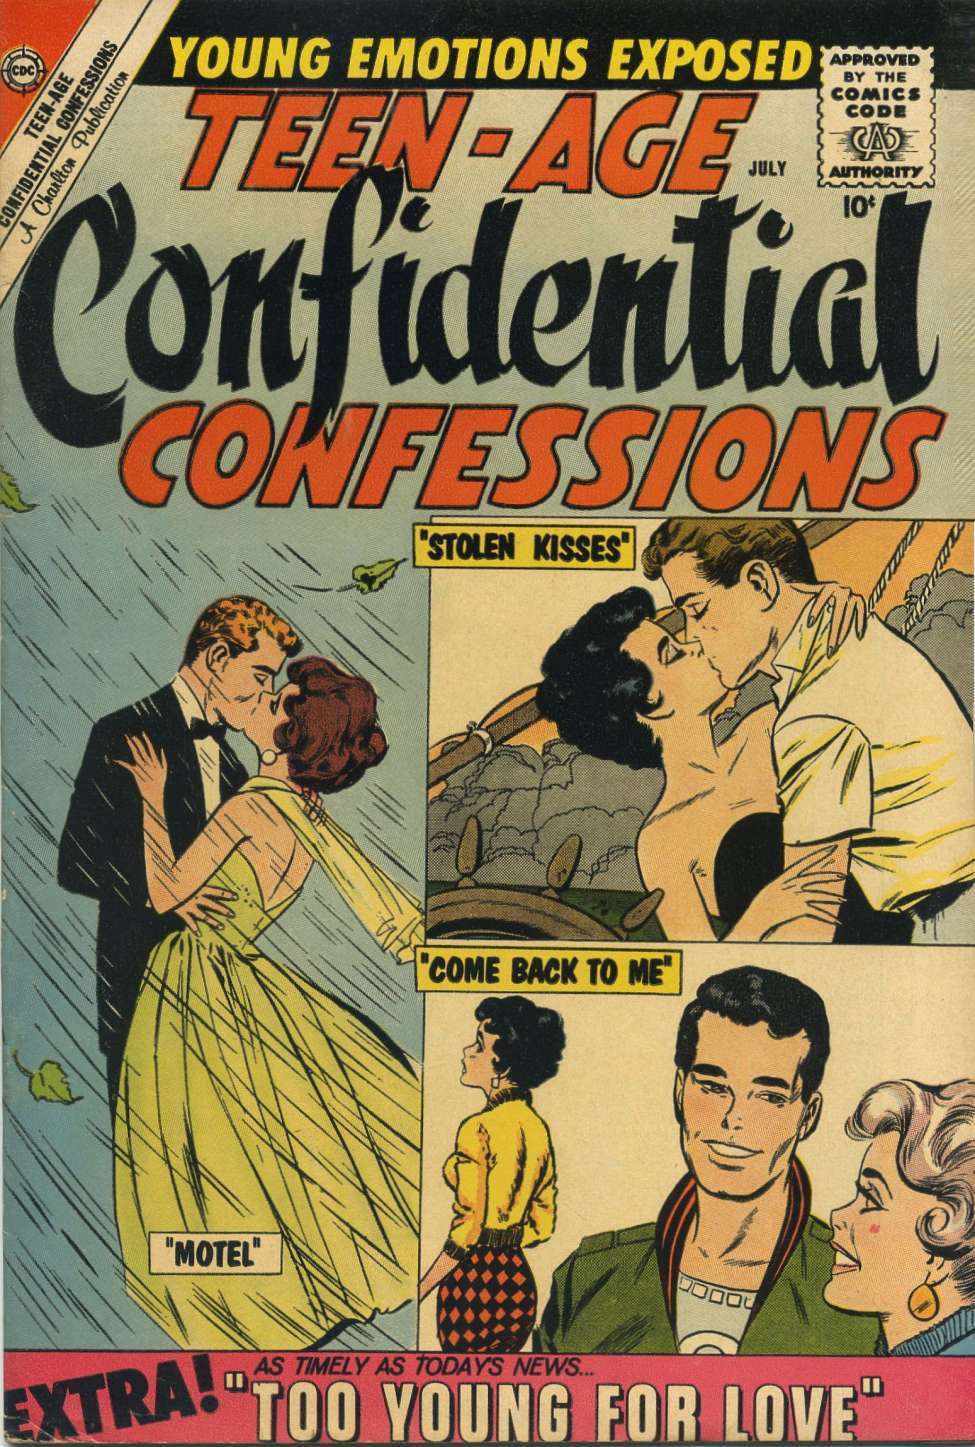 Comic Book Cover For Teen-Age Confidential Confessions 1